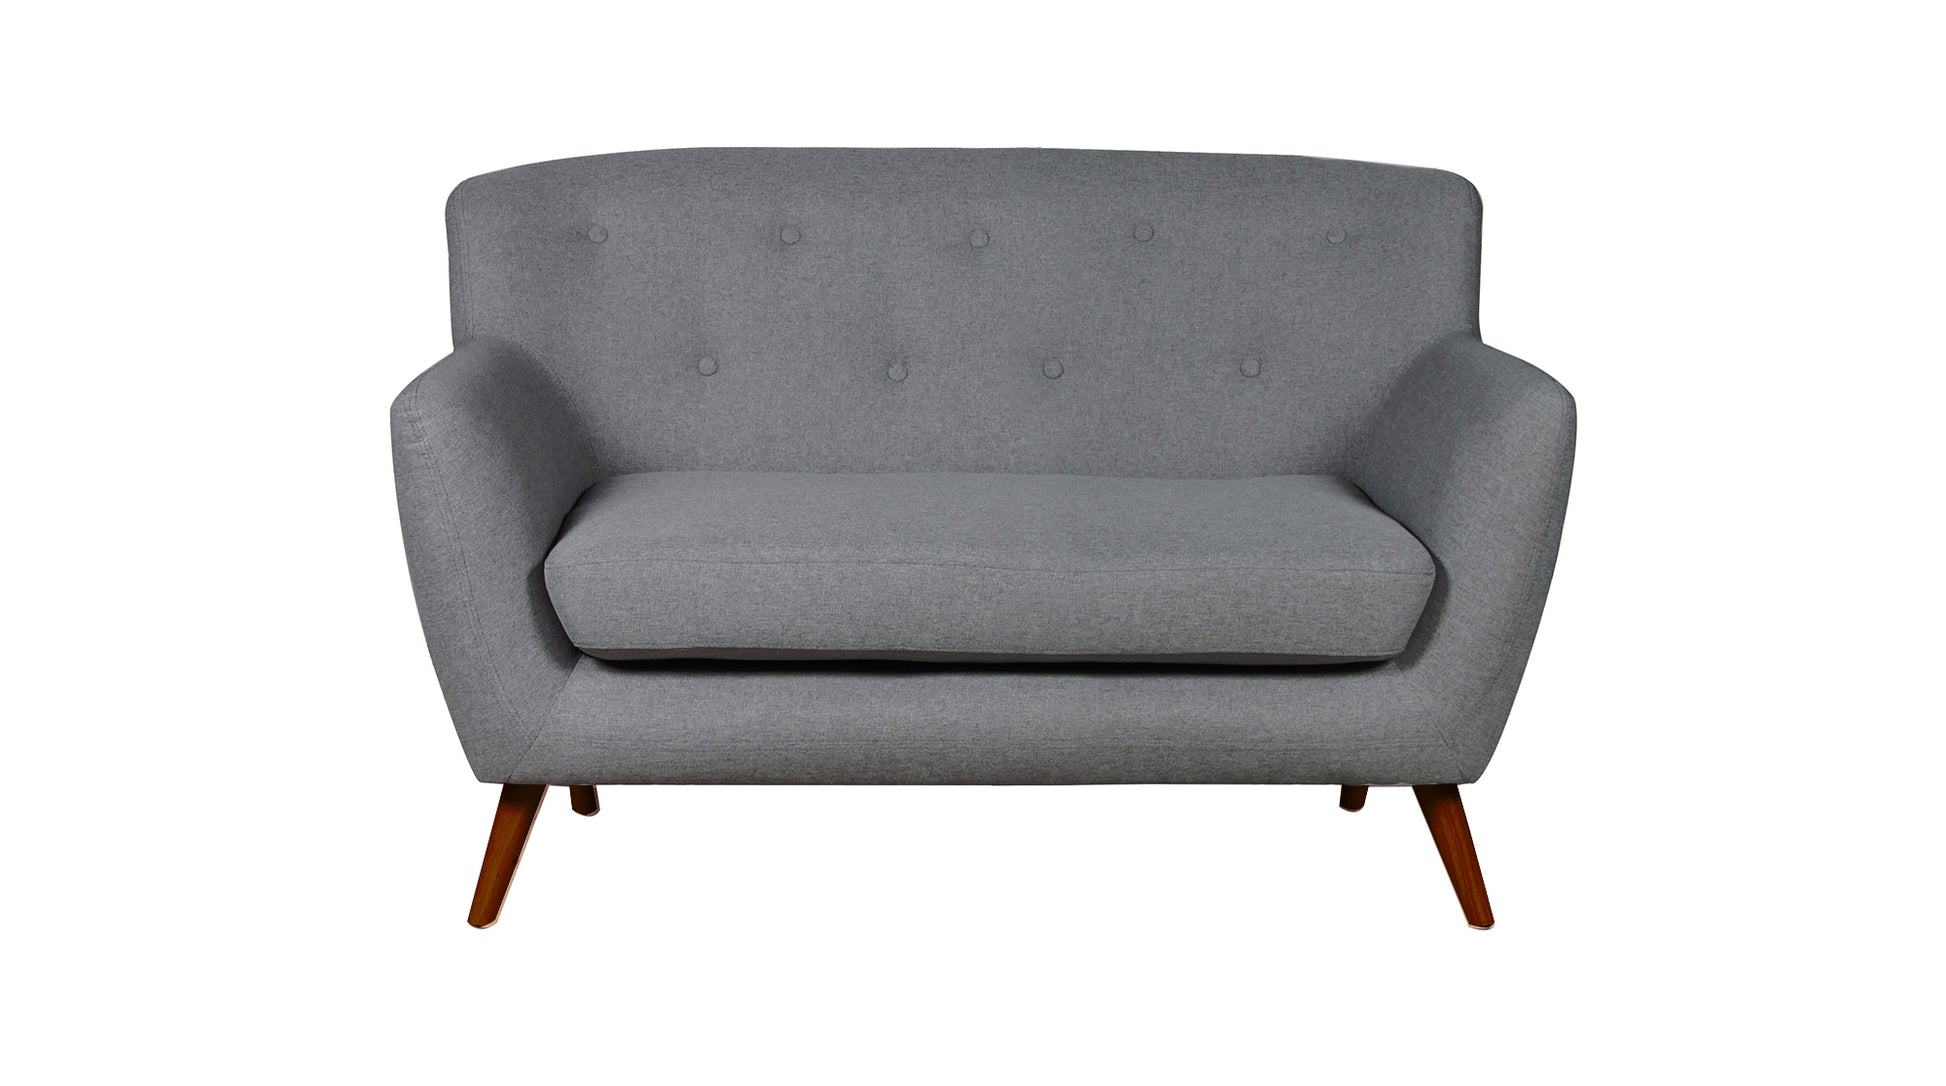 Commercial Grade Woven Fabric Minimalist Settee. 1,2,3 Seat Sofa Available in dark grey, light grey, teal *** - CasaFenix